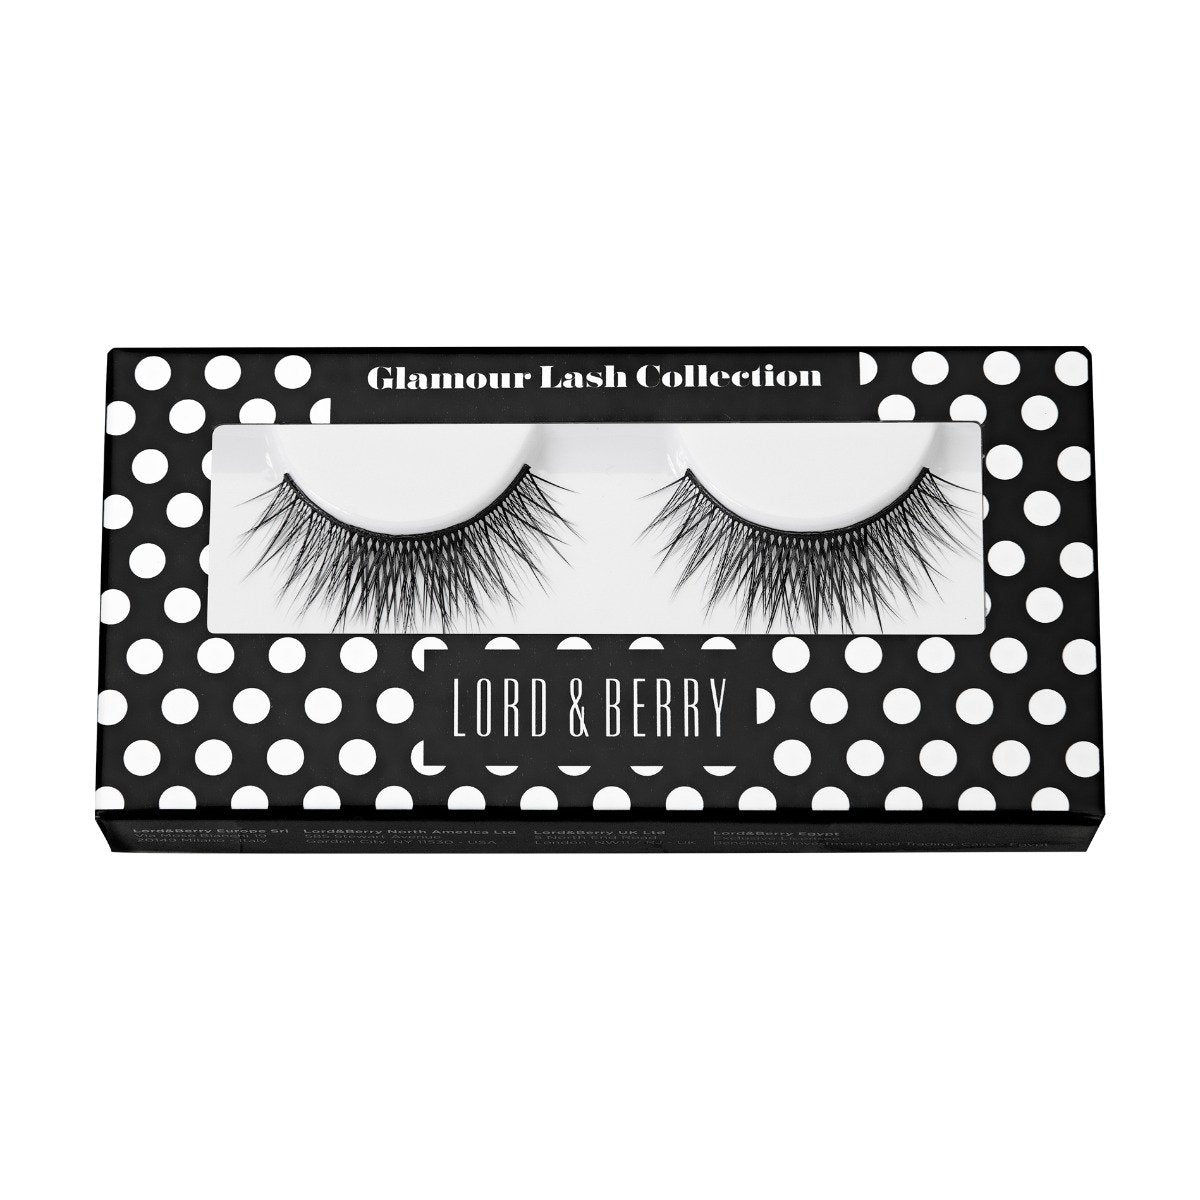 Lord & Berry Eyelashes Glamour Lash Collection - EL10 - Bloom Pharmacy